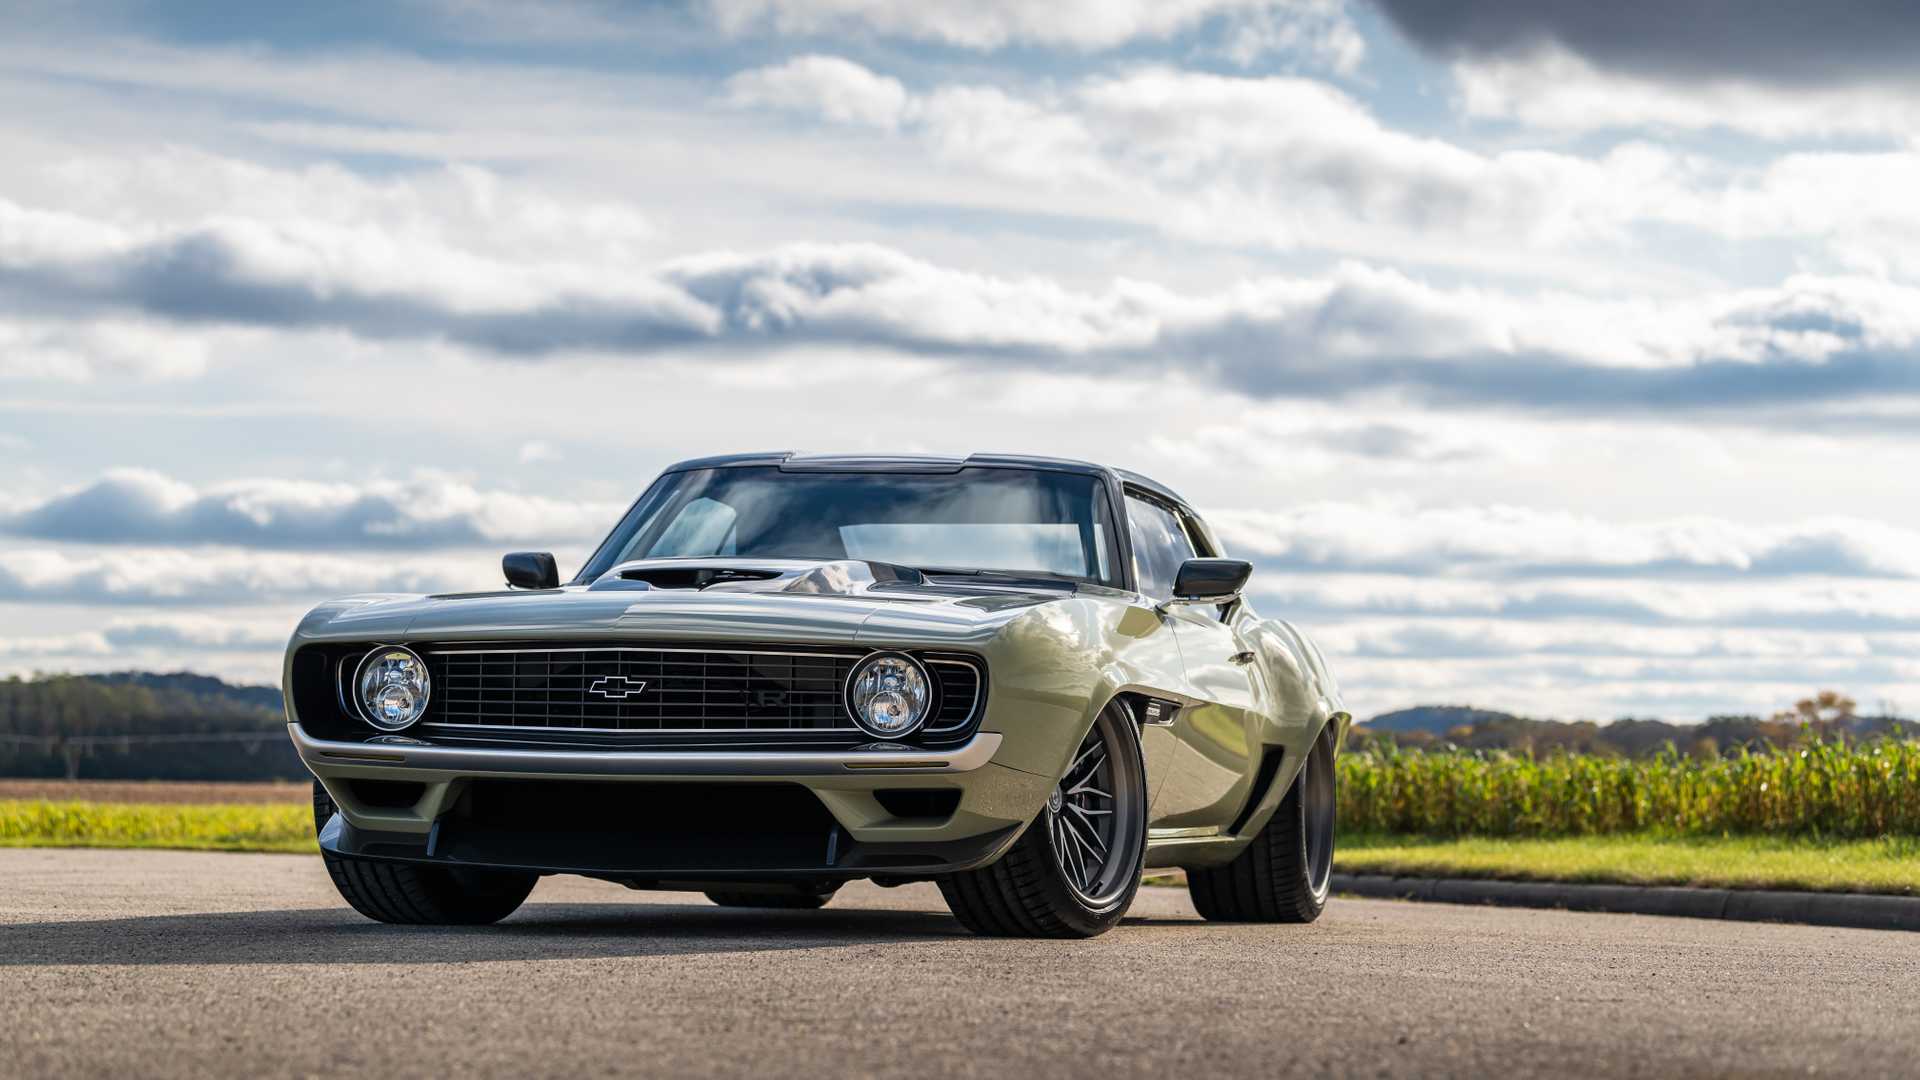 https://www.motorious.com/content/images/2021/05/ringbrothers-shoots-for-the-moon-with-a-1969-chevy-camaro-named-valkyrja.jpg